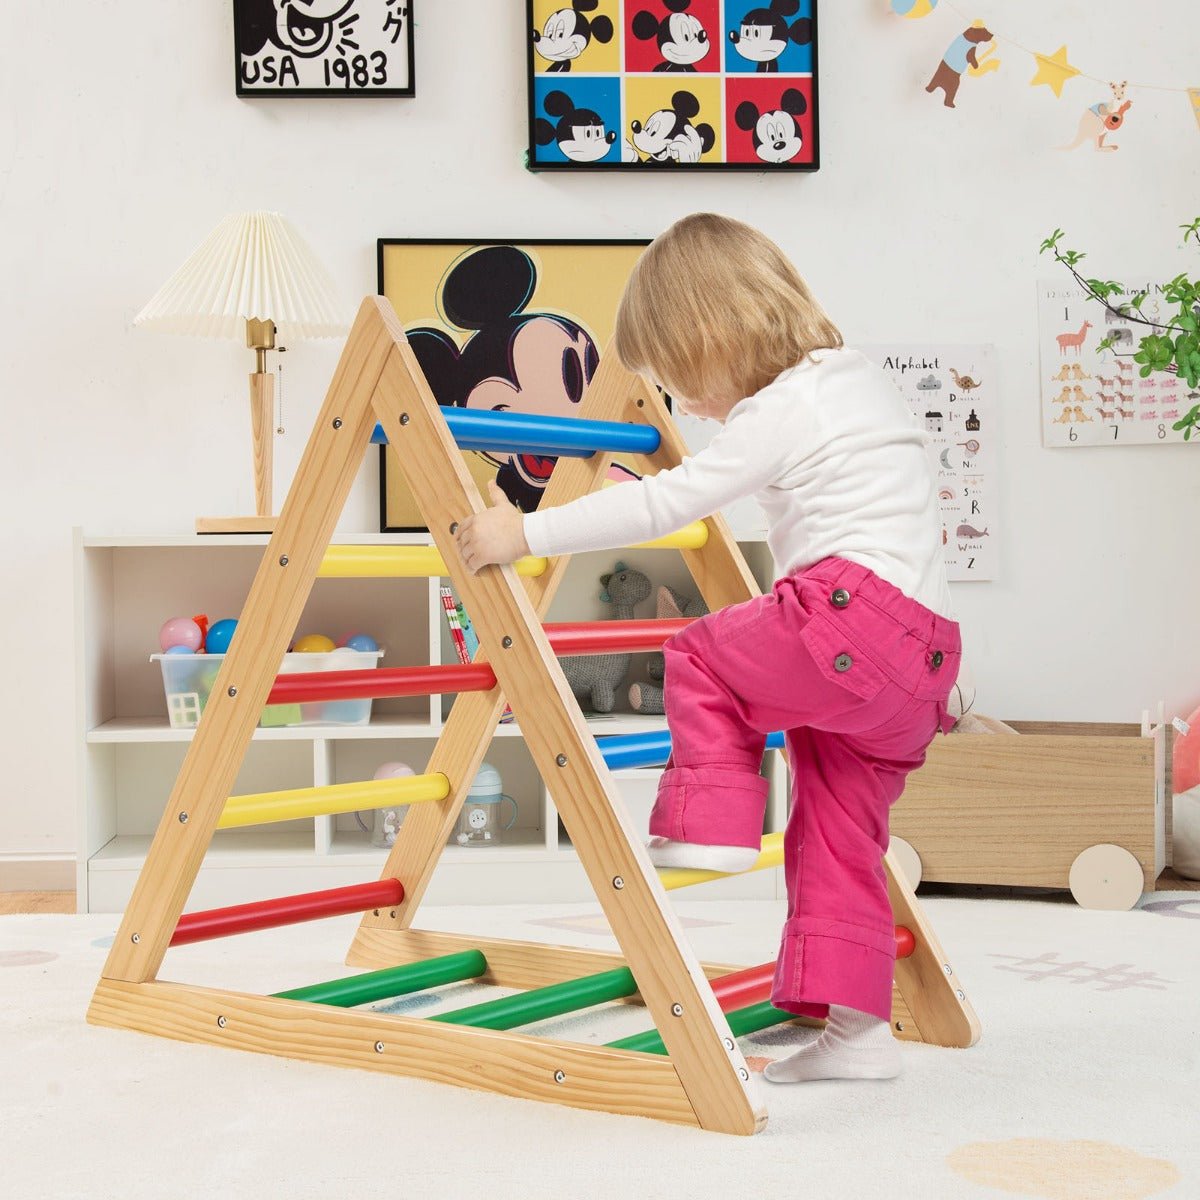 Whimsical Wooden Climbing Triangle Ladder - Spark Imaginative Play for Kids